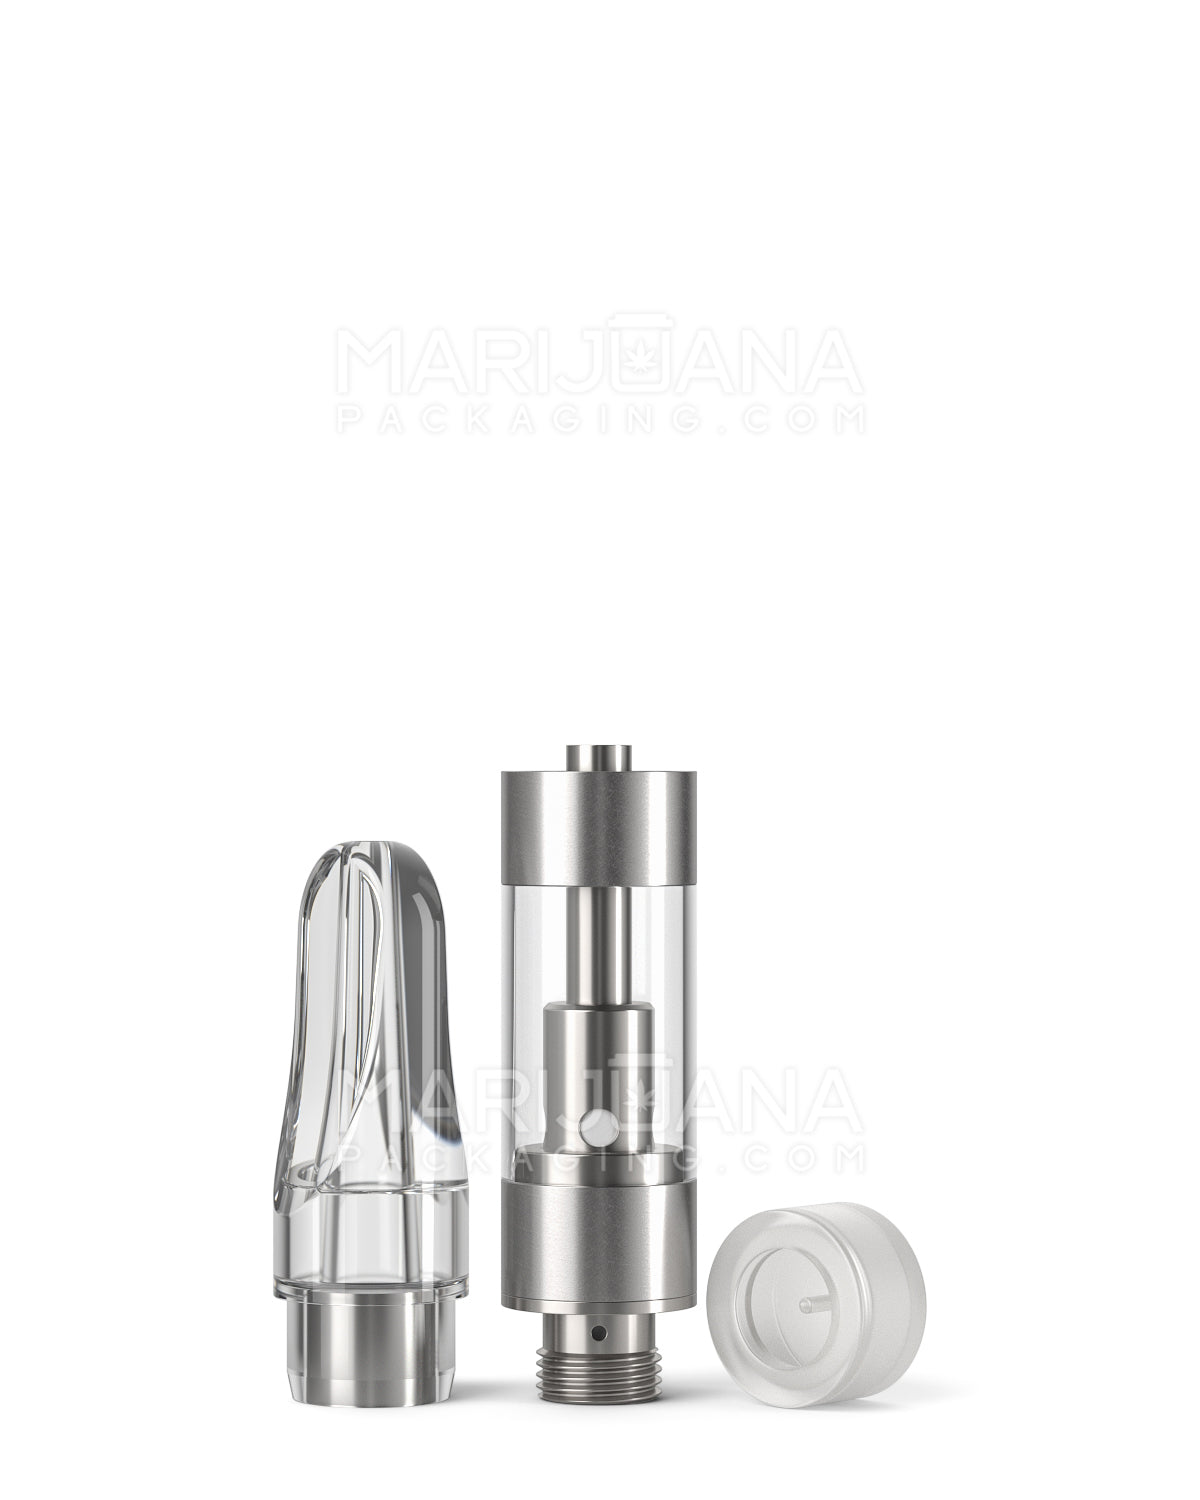 CCELL | Liquid6 Reactor Plastic Vape Cartridge with Clear Plastic Mouthpiece | 0.5mL - Press On - 100 Count - 5